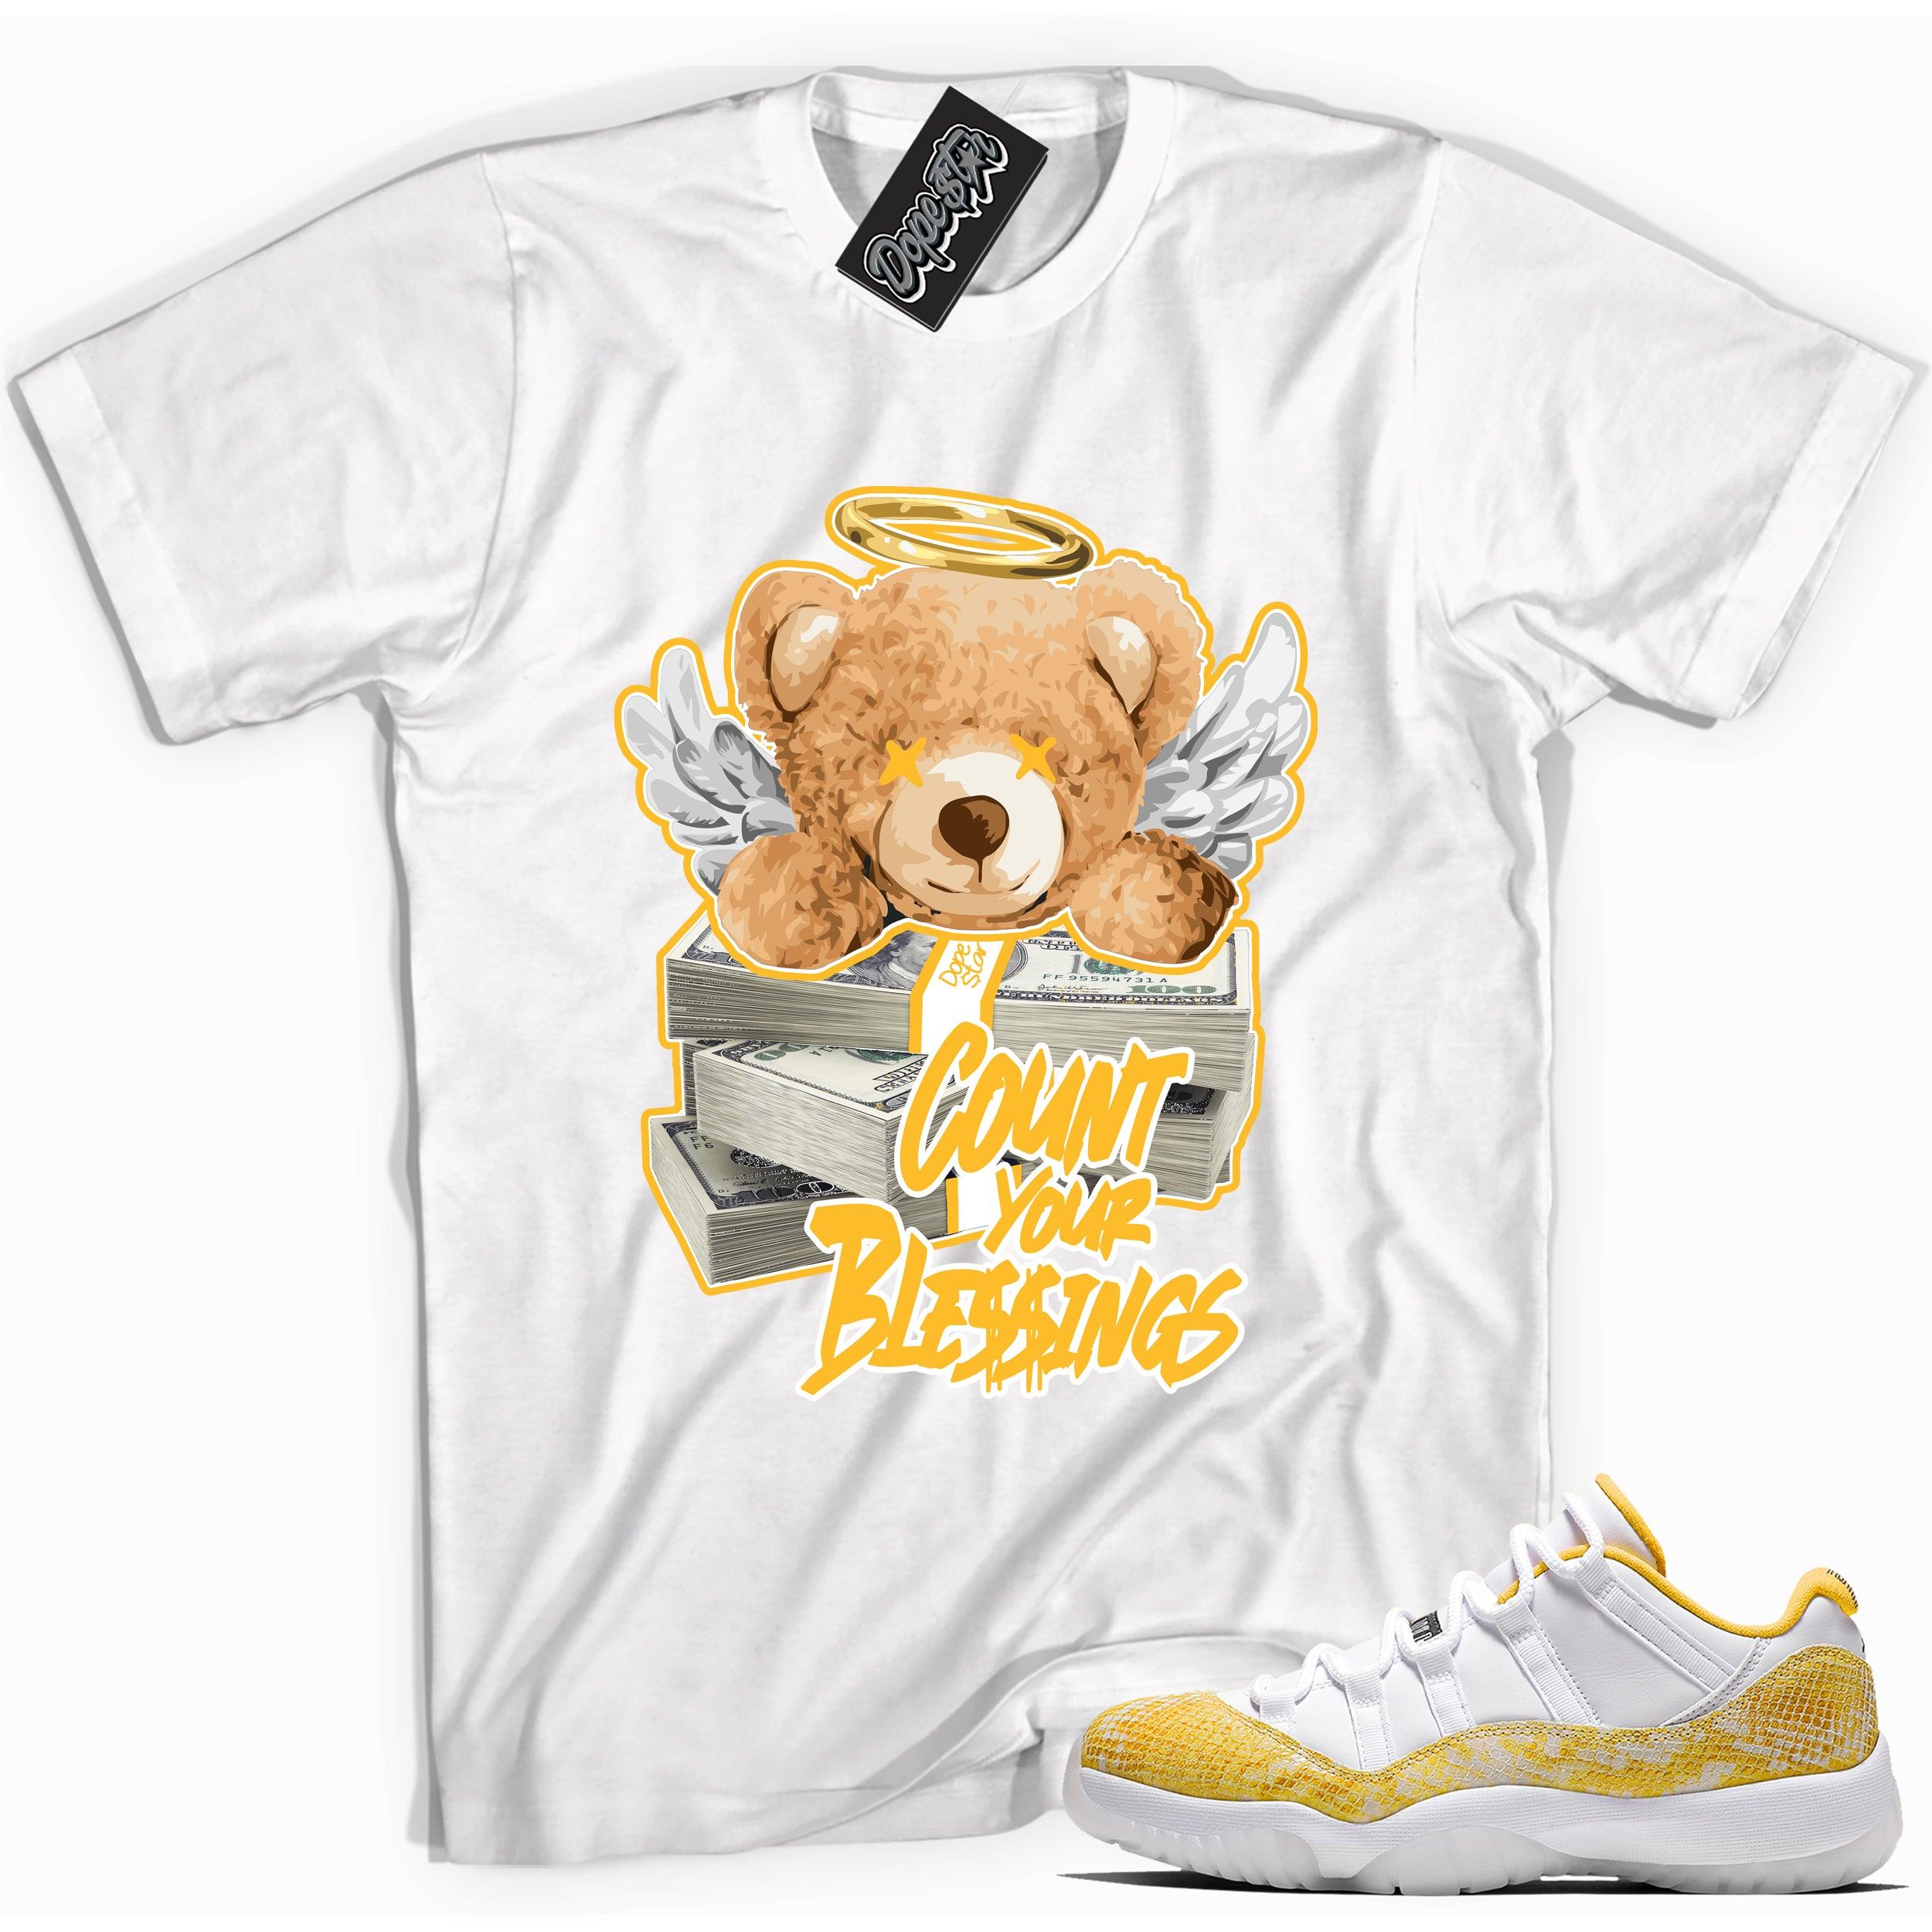 Cool white graphic tee with 'count your blessings' print, that perfectly matches Air Jordan 11 Low Yellow Snakeskin sneakers